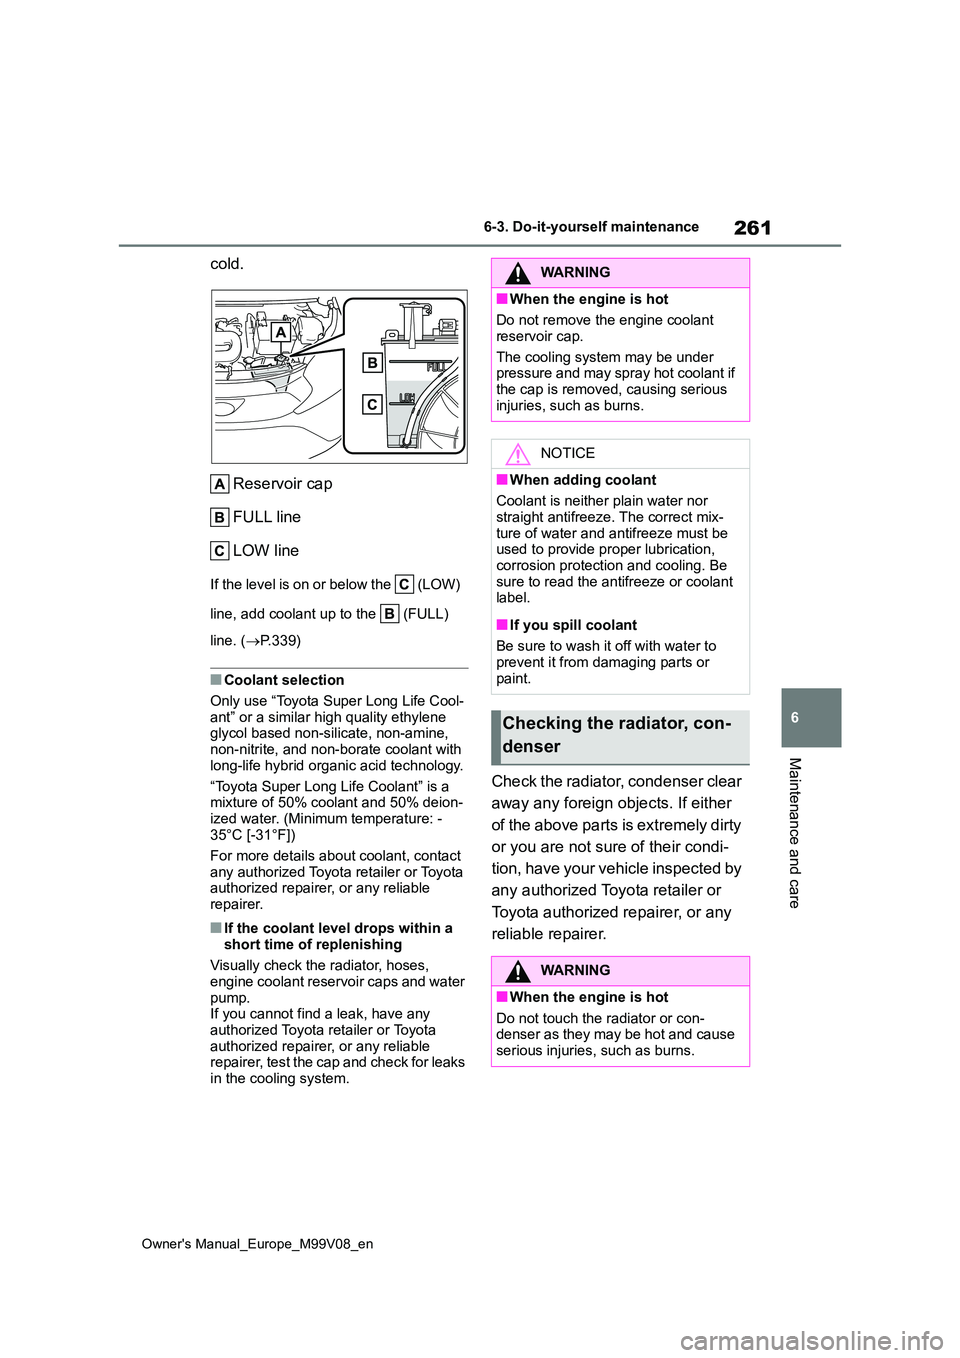 TOYOTA AYGO X 2022  Owners Manual (in English) 261
6
Owner's Manual_Europe_M99V08_en
6-3. Do-it-yourself maintenance
Maintenance and care
cold. 
Reservoir cap 
FULL line 
LOW line
If the level is on or below the   (LOW)  
line, add coolant up 